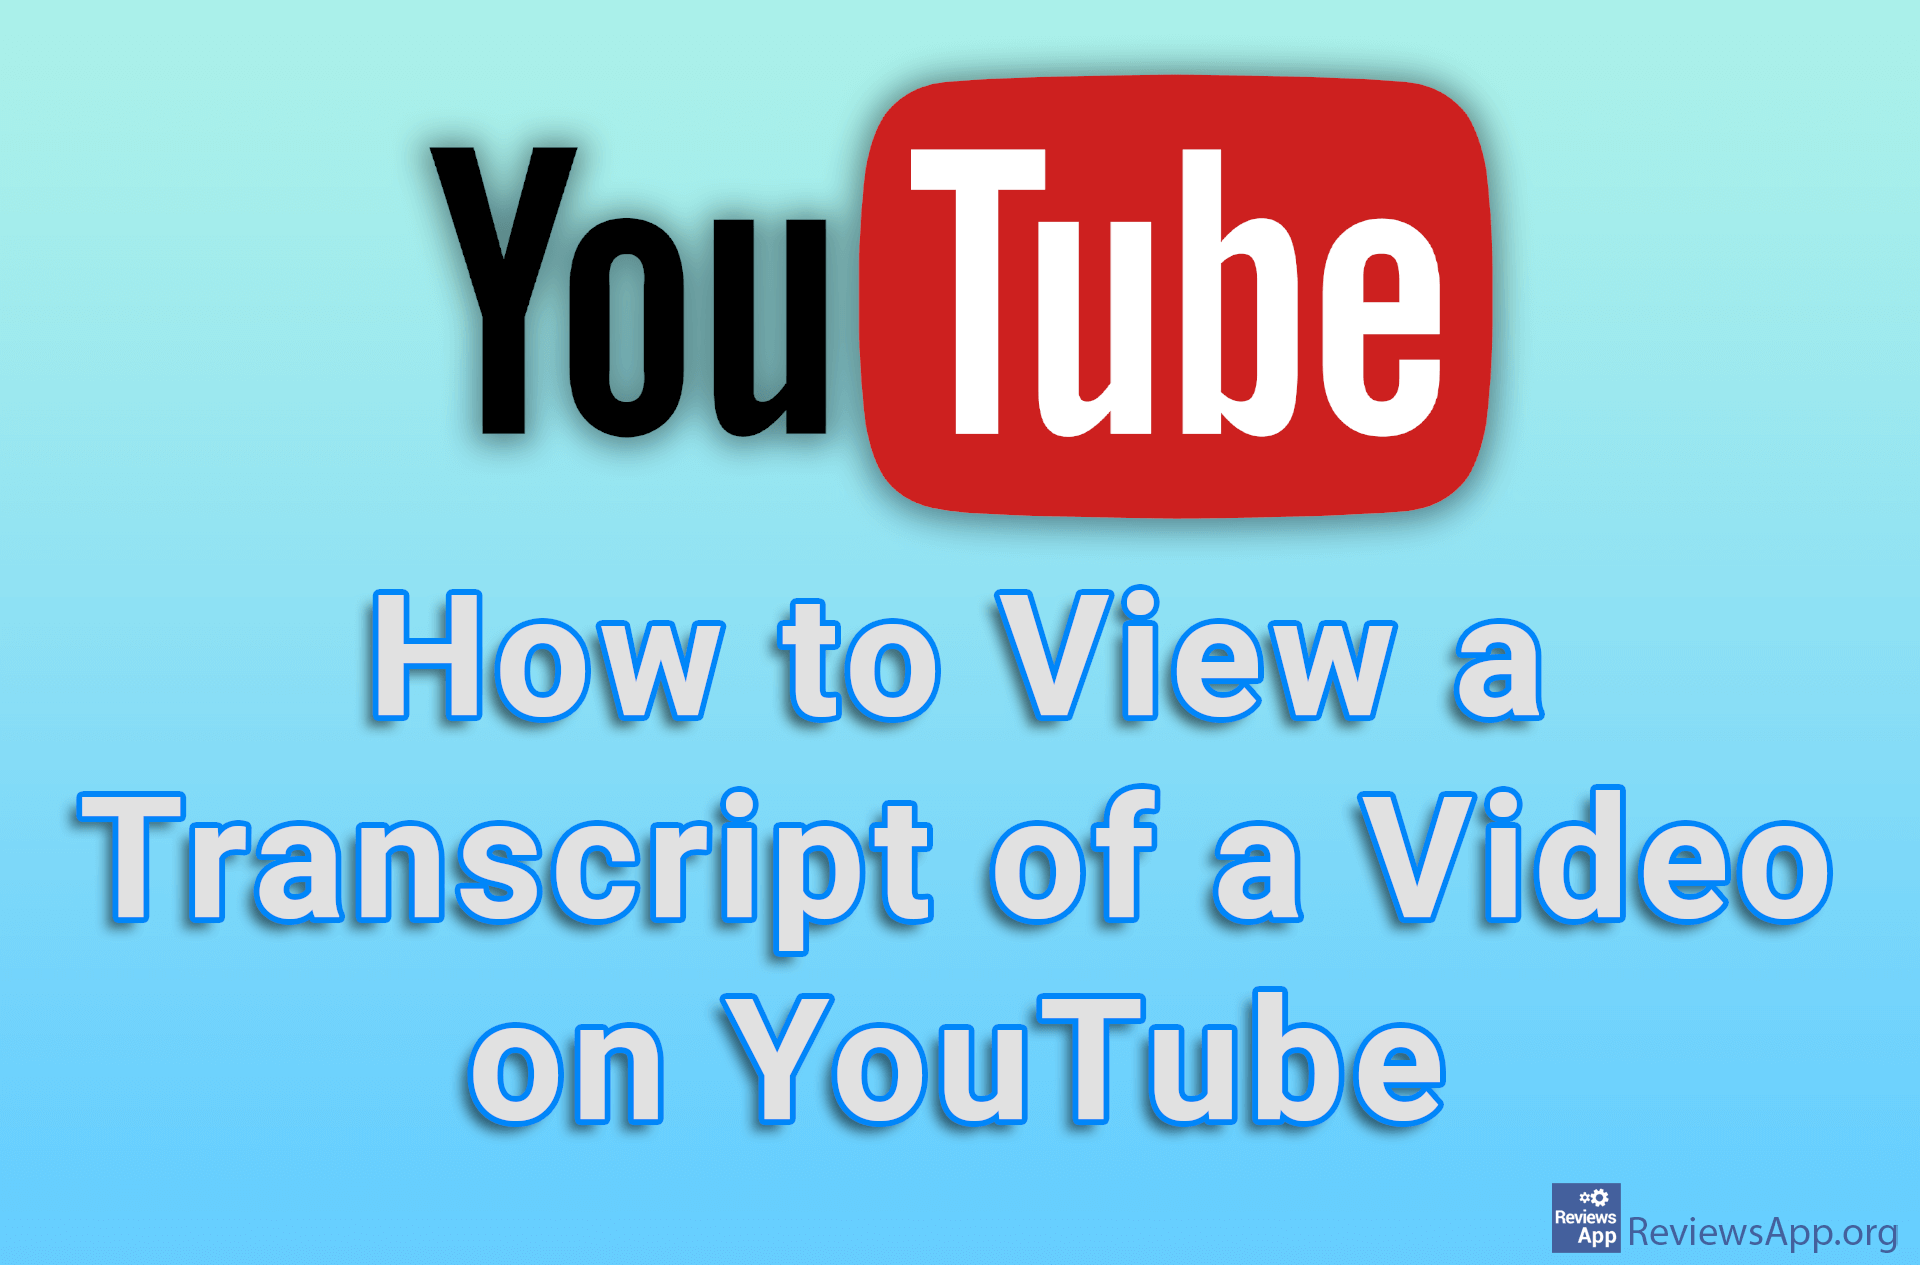 How to View a Transcript of a Video on YouTube